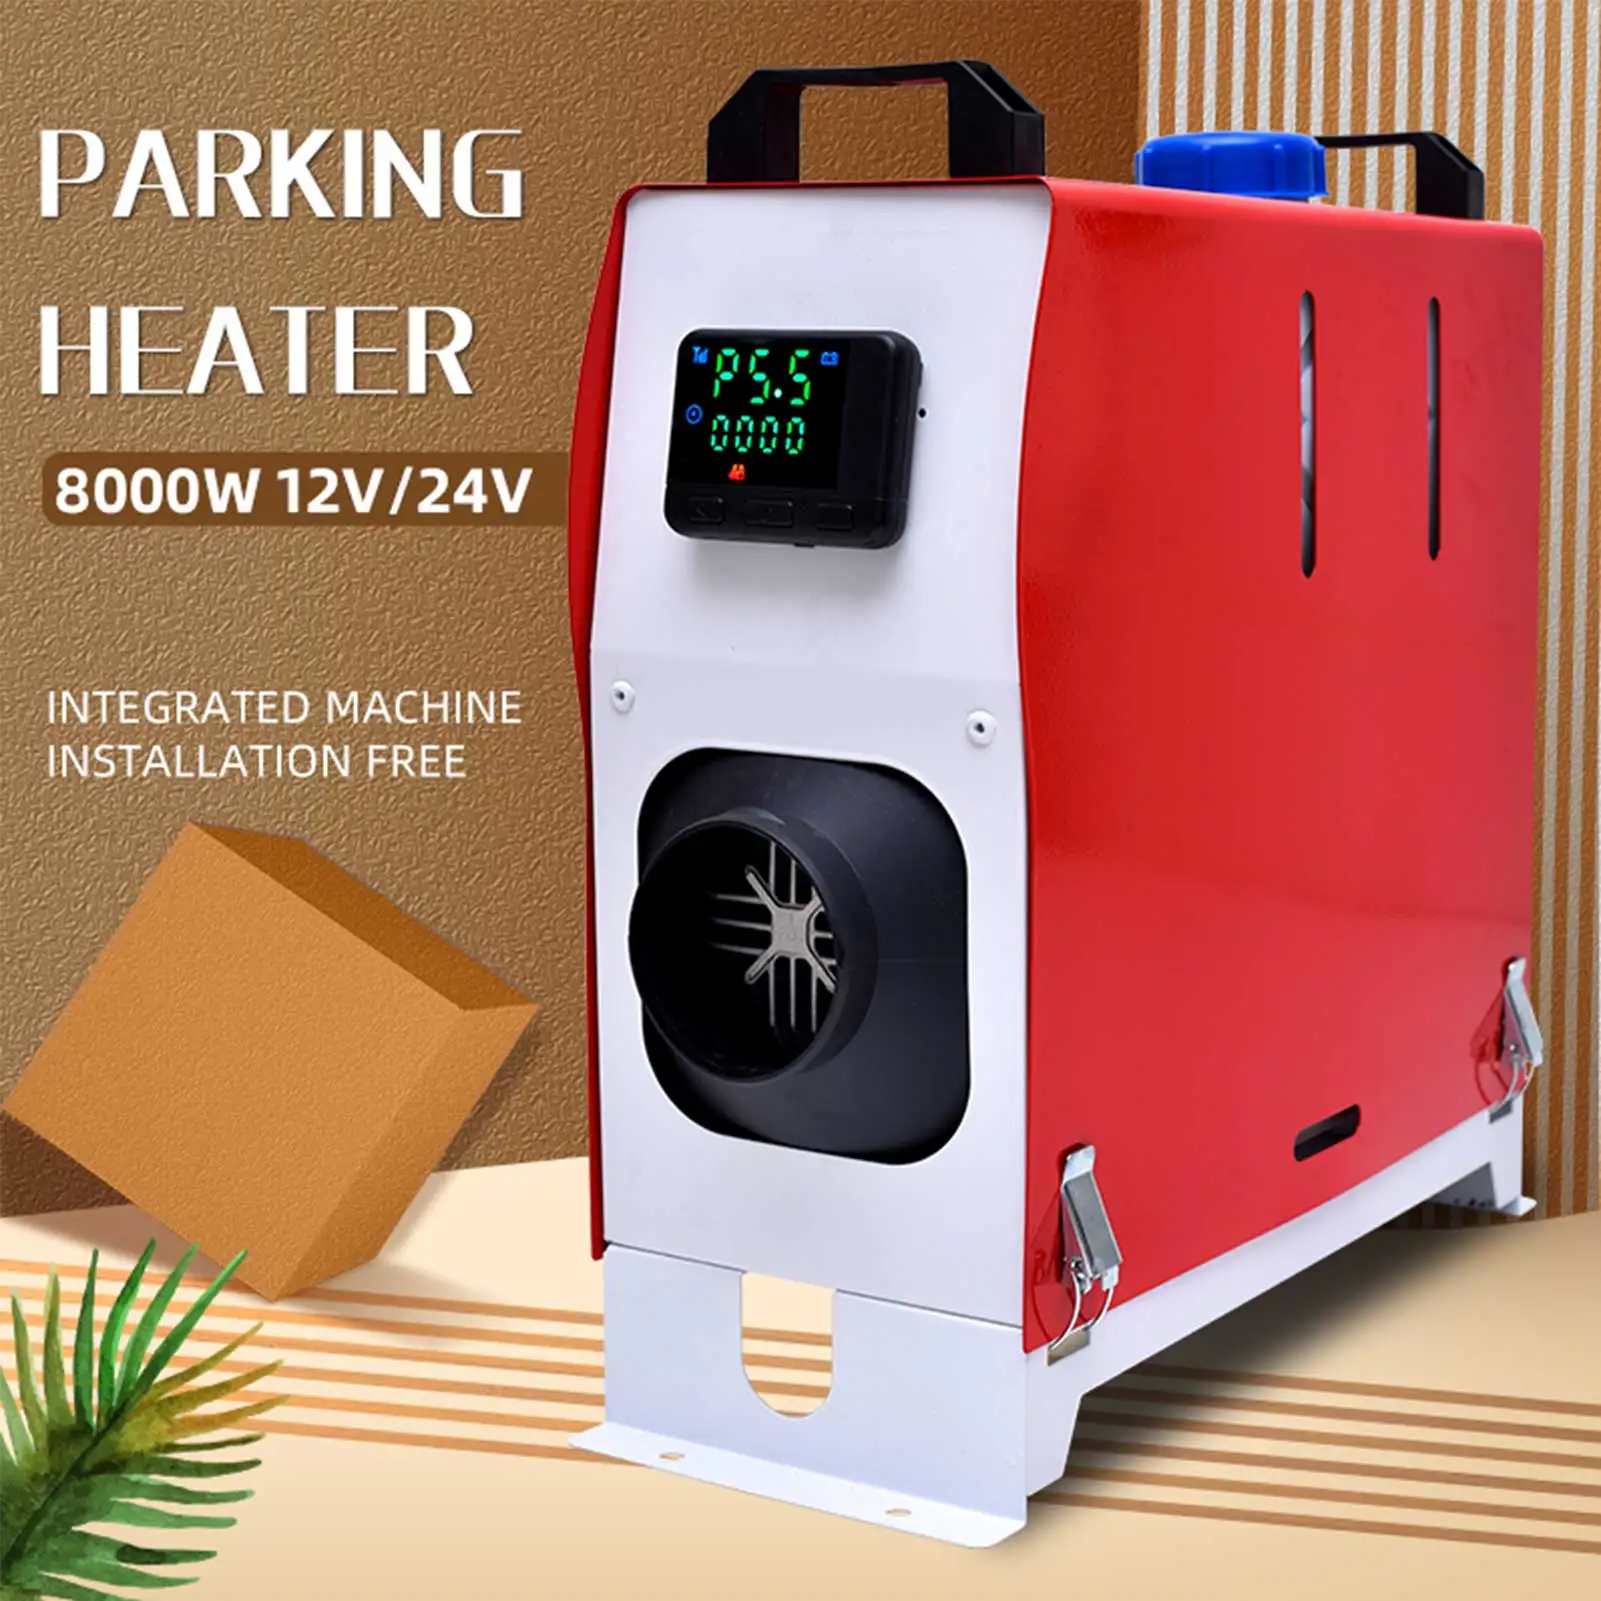 All In One 12V 8KW Diesel Air Heater Car Parking Heater Air Conditioner Machine Remote Control LCD Display For Auto Truck Boat